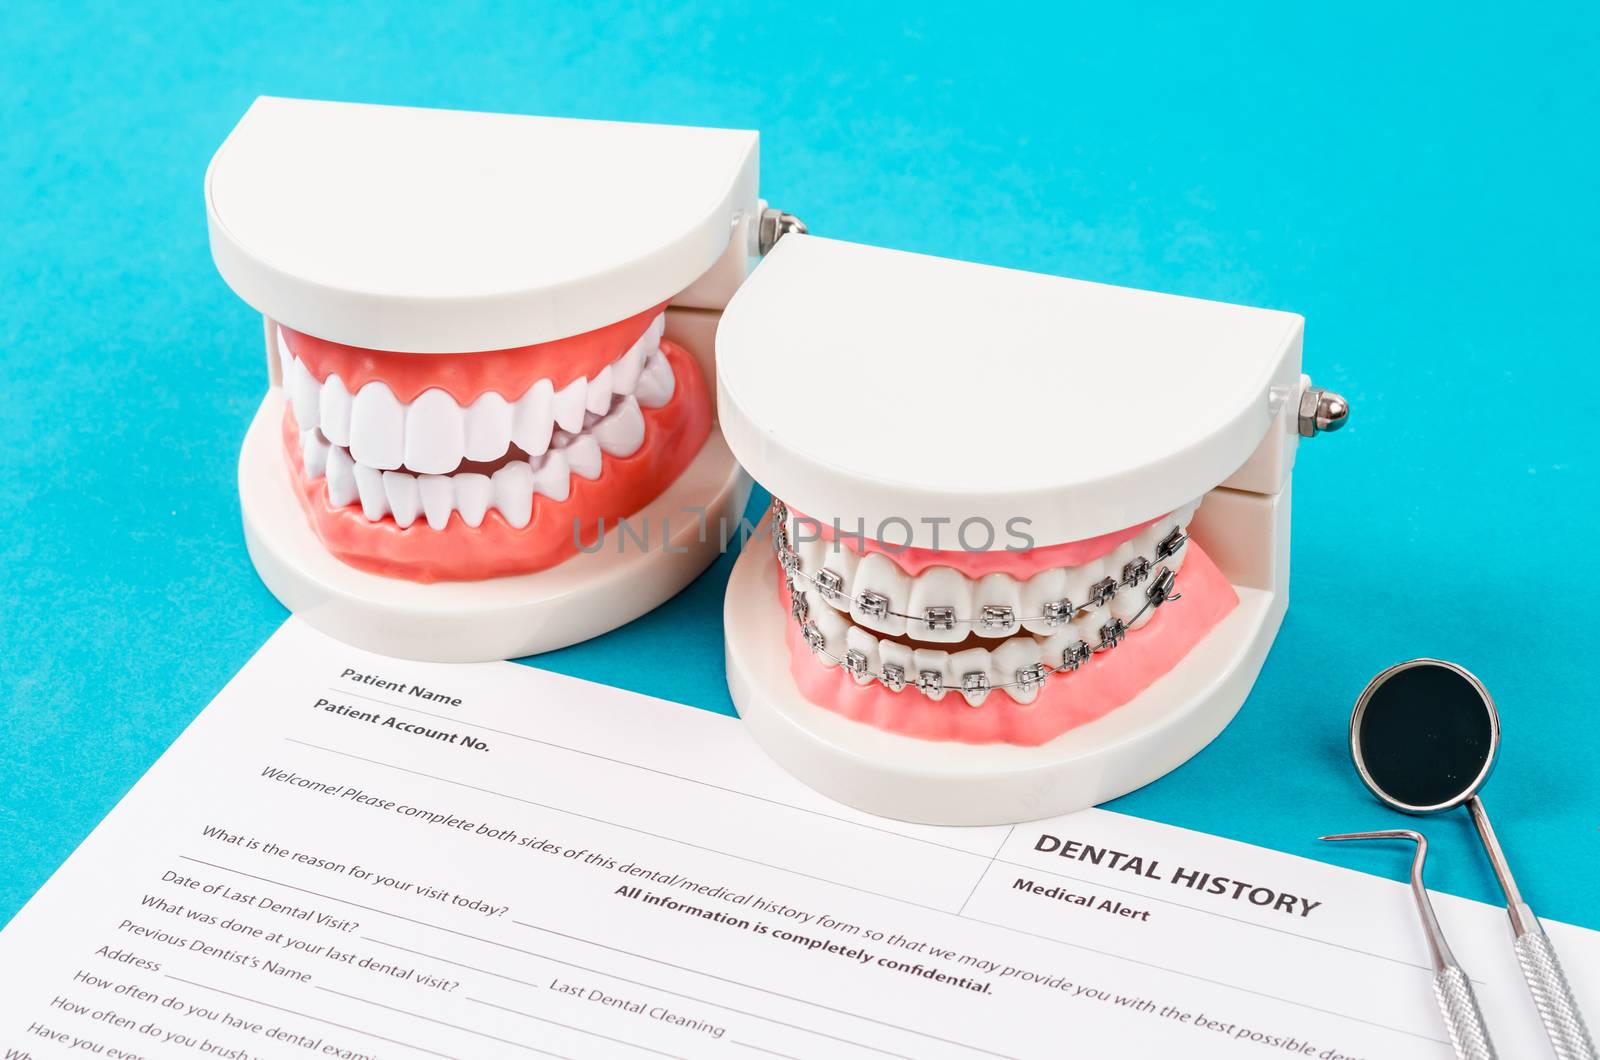 Dental history form with model tooth and dental instruments. Dental health and teeth care concept.